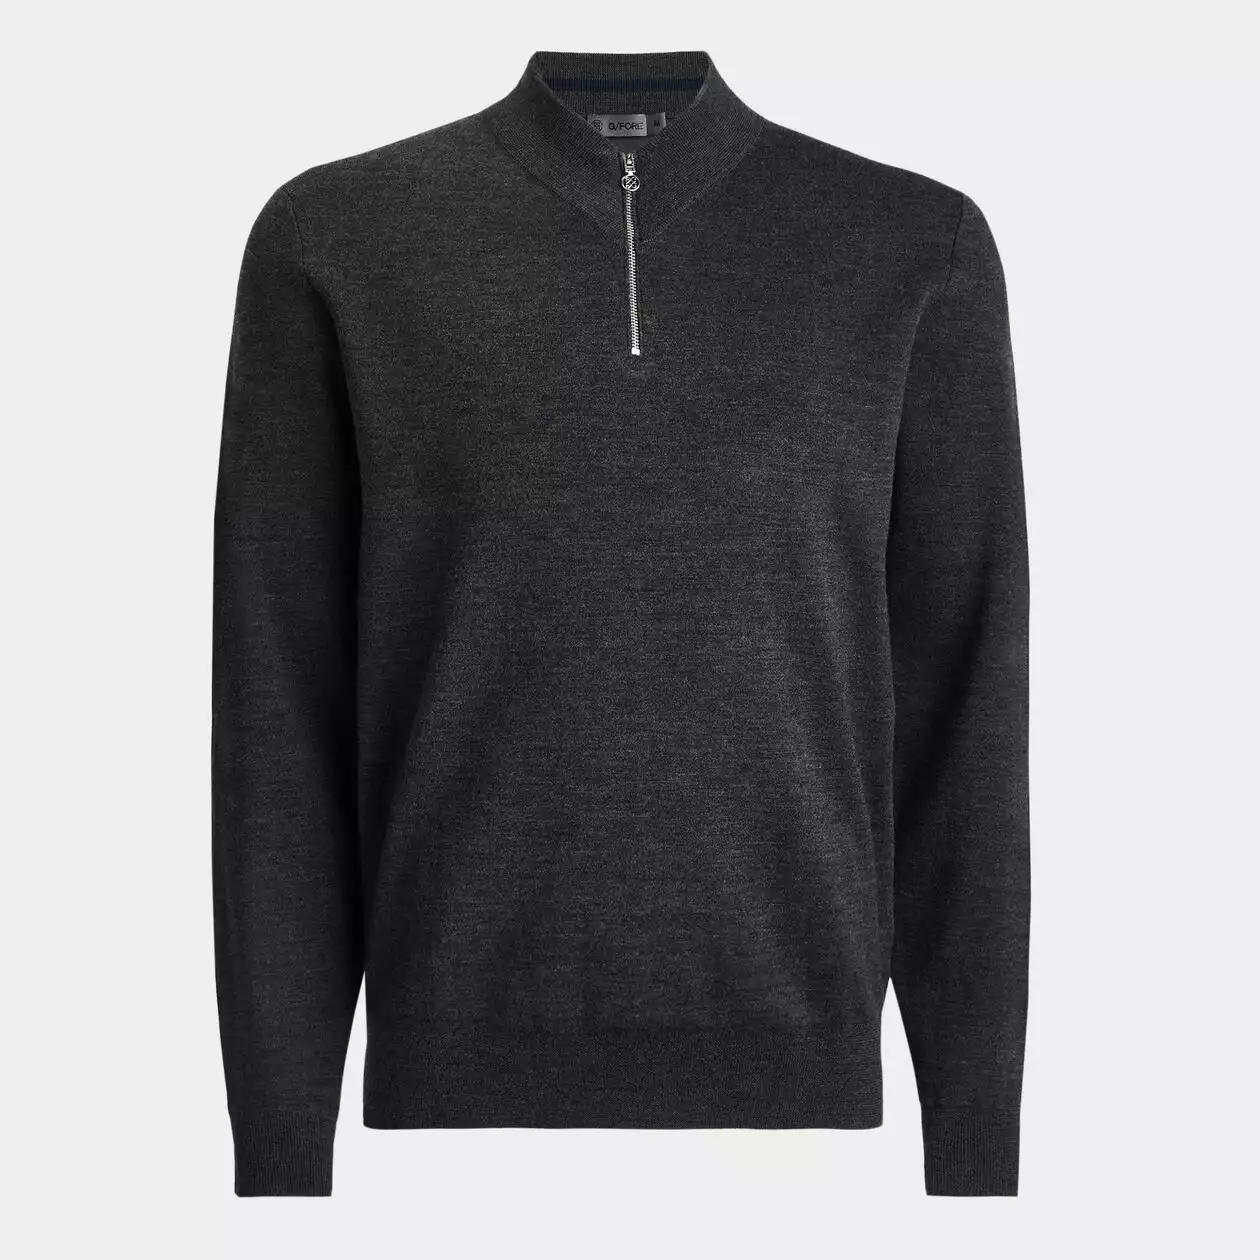 G/FORE Contrast Quarter Zip Sweater - Use Code "G4BREAKING8010" to Save 10%